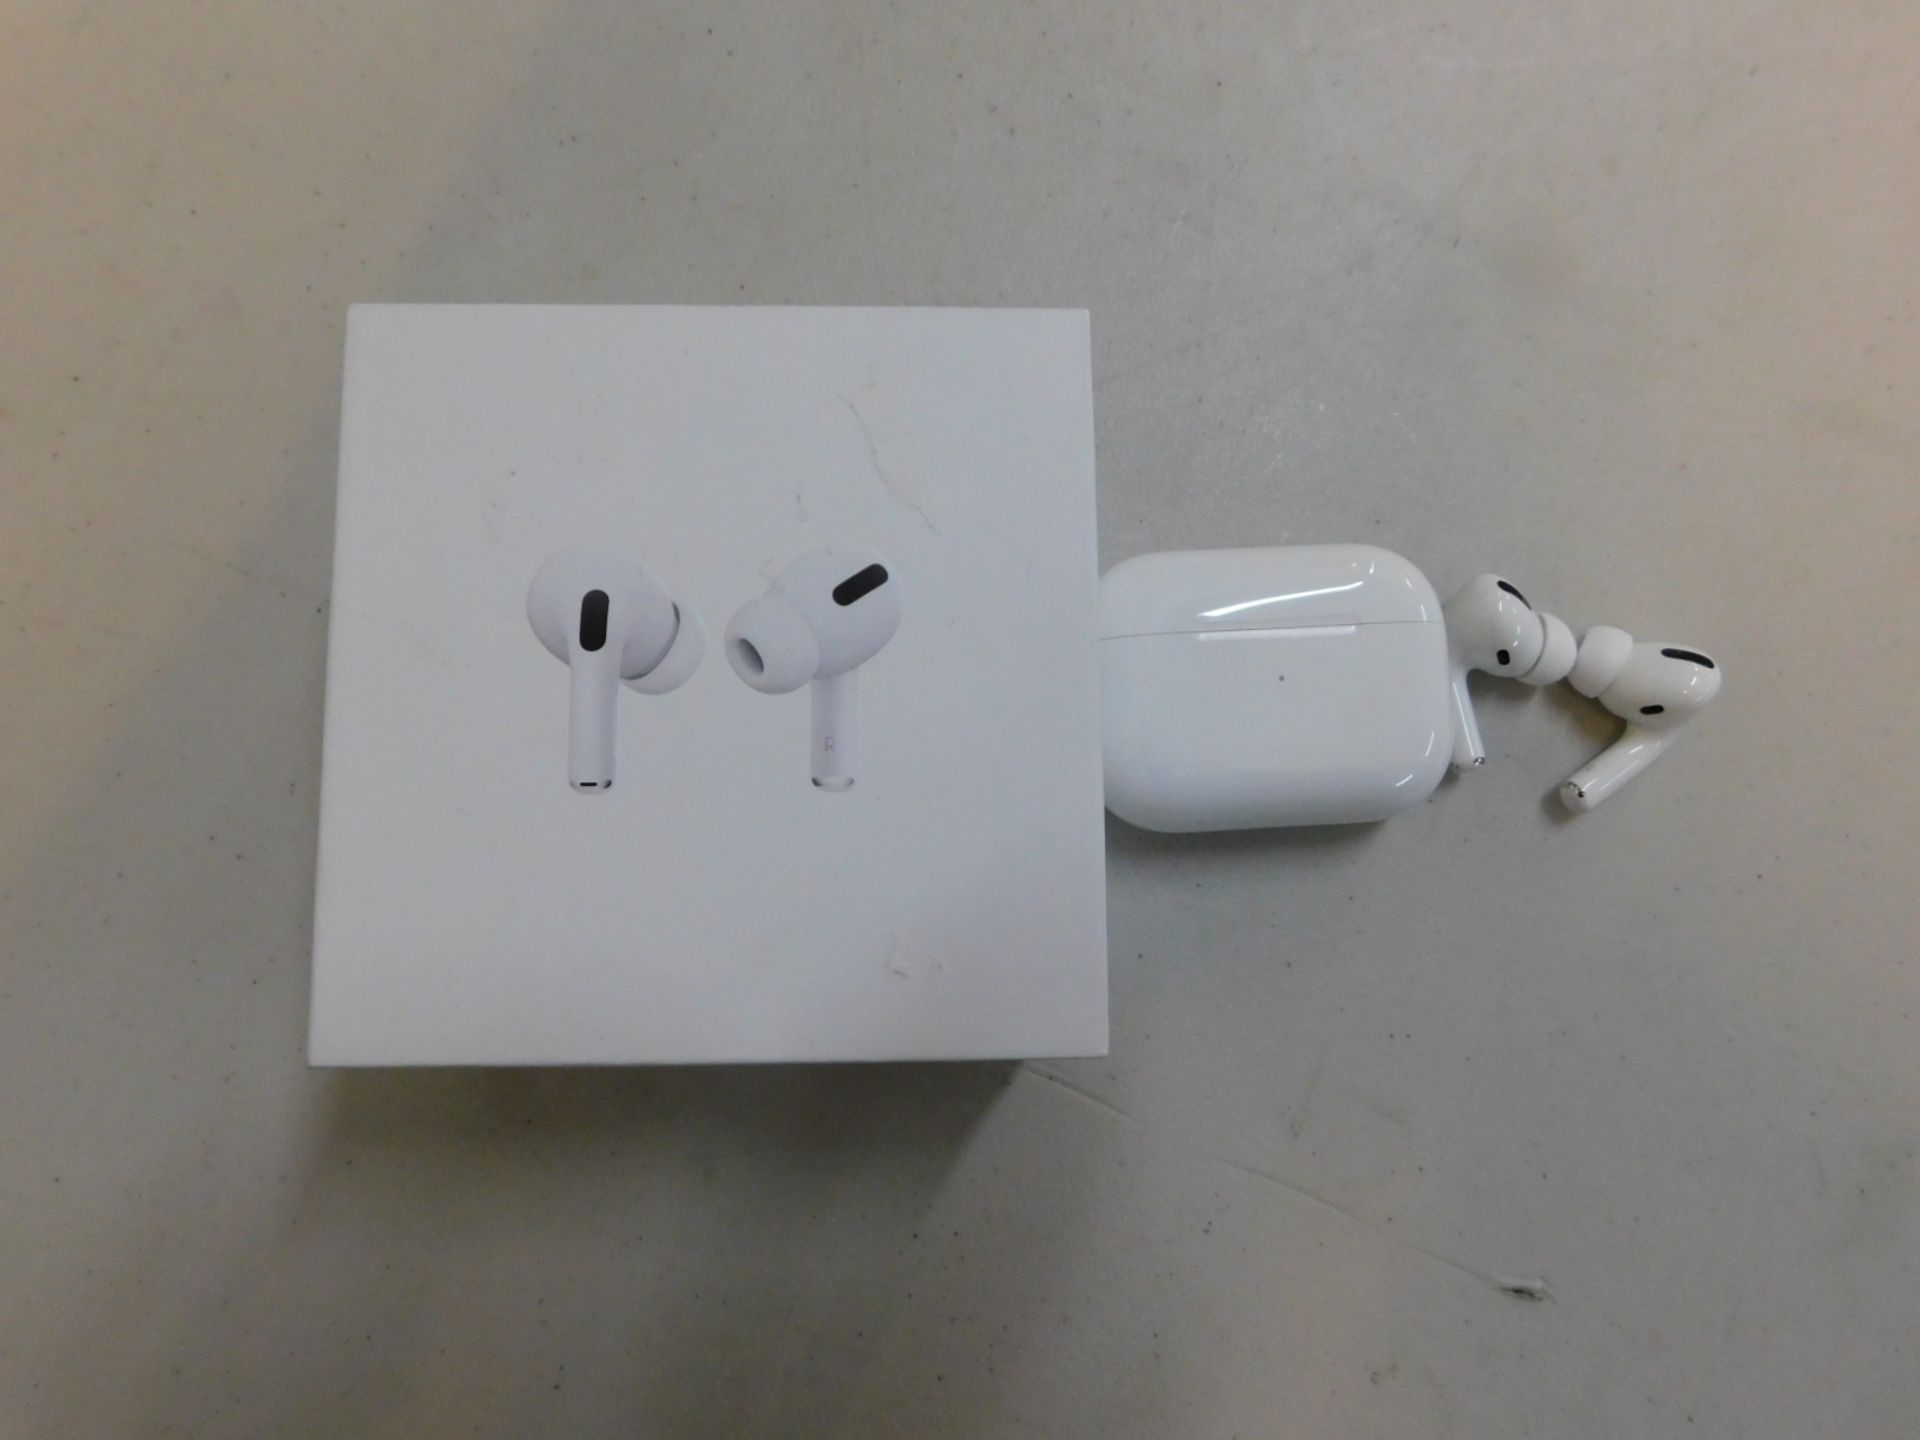 1 BOXED PAIR OF APPLE AIRPODS PRO BLUETOOTH EARPHONES WITH WIRELESS CHARGING CASE RRP Â£229.99